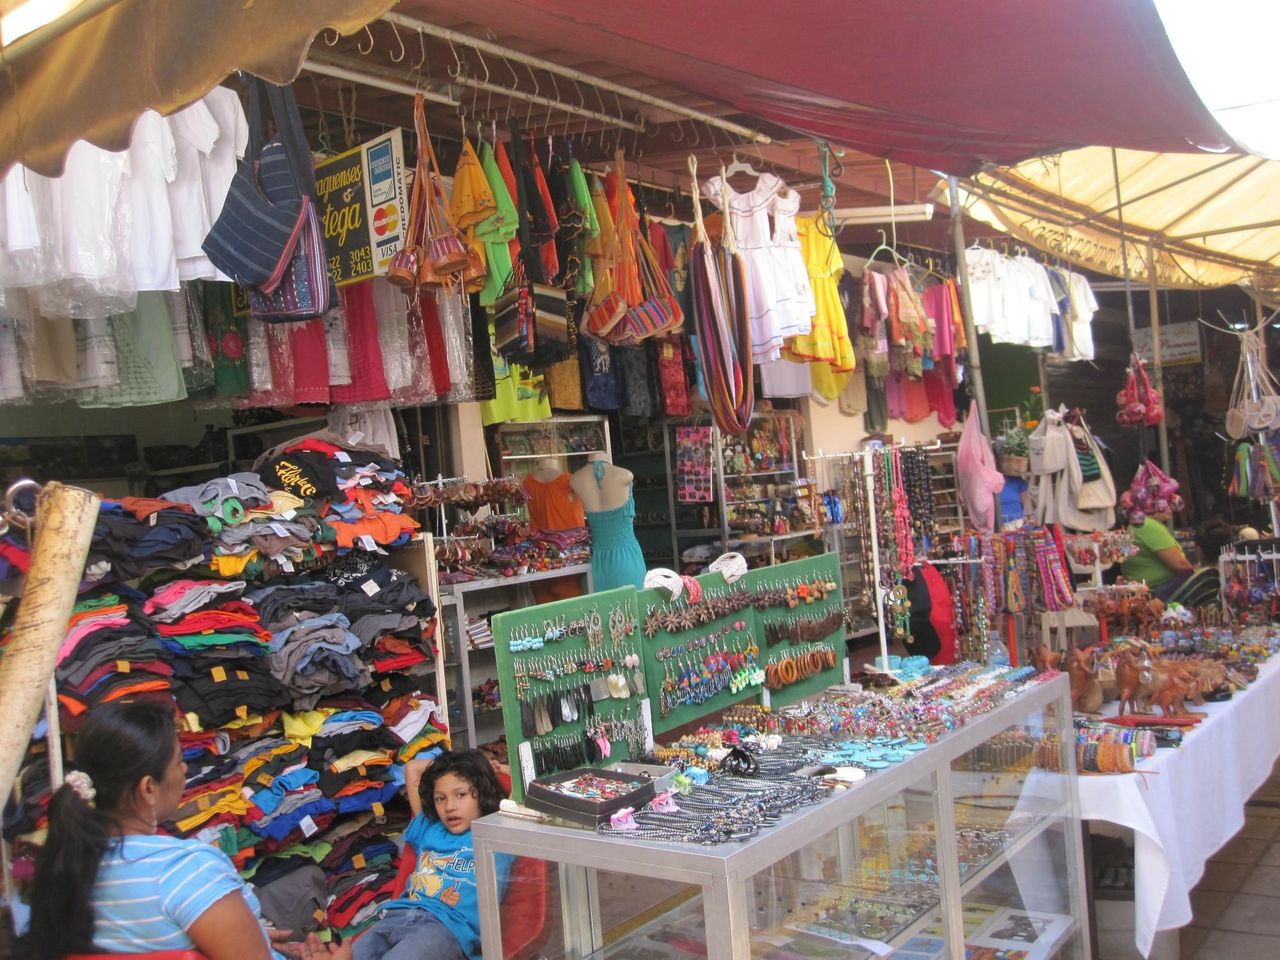                                     One of the Vendor Stalls
                
                